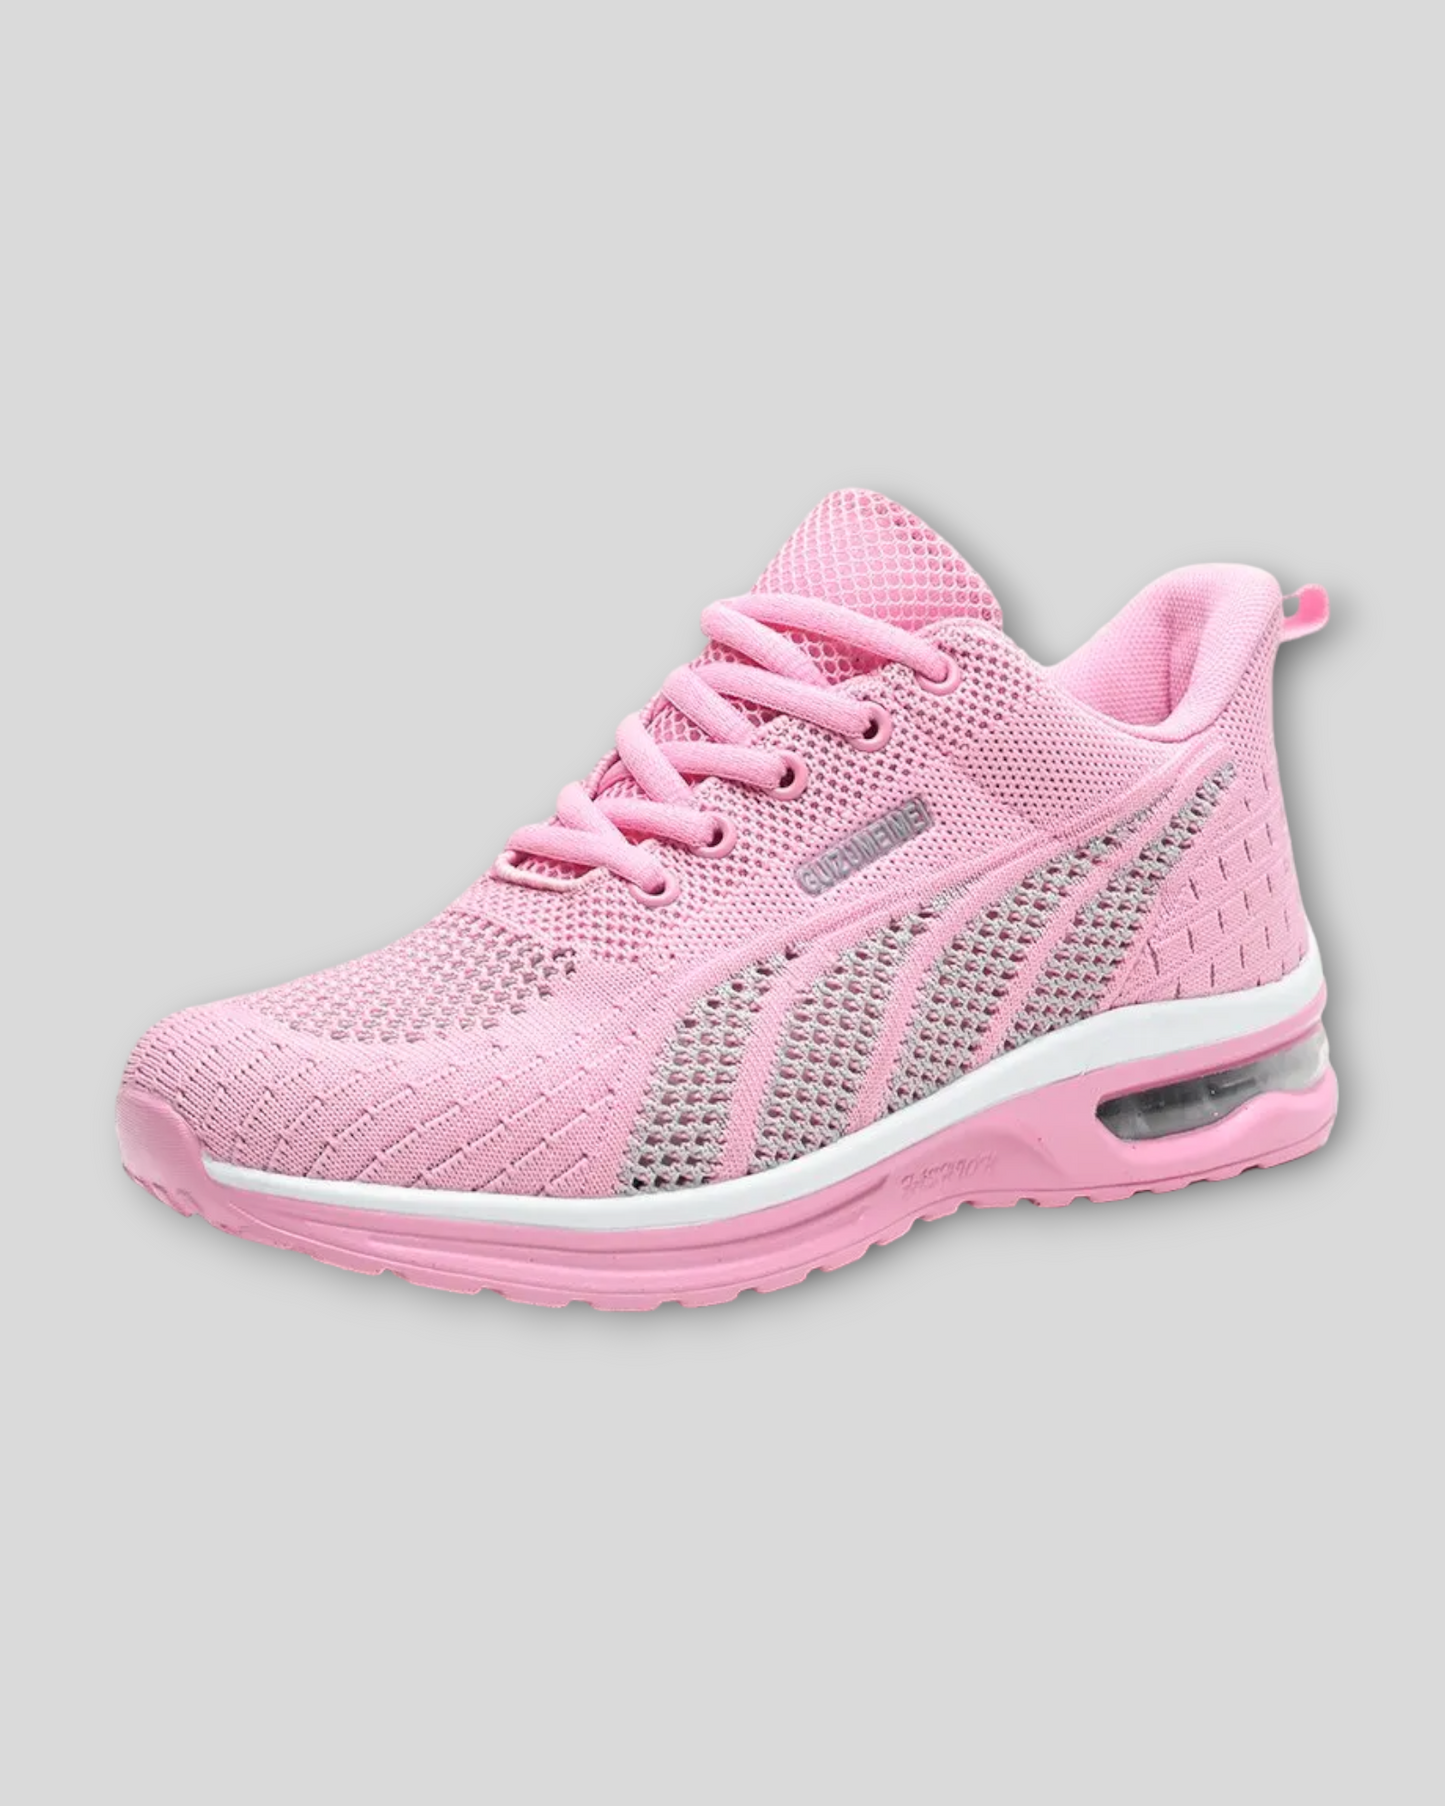 Women's Running Pink Tennis Sneakers/ Trainers/ Shoes